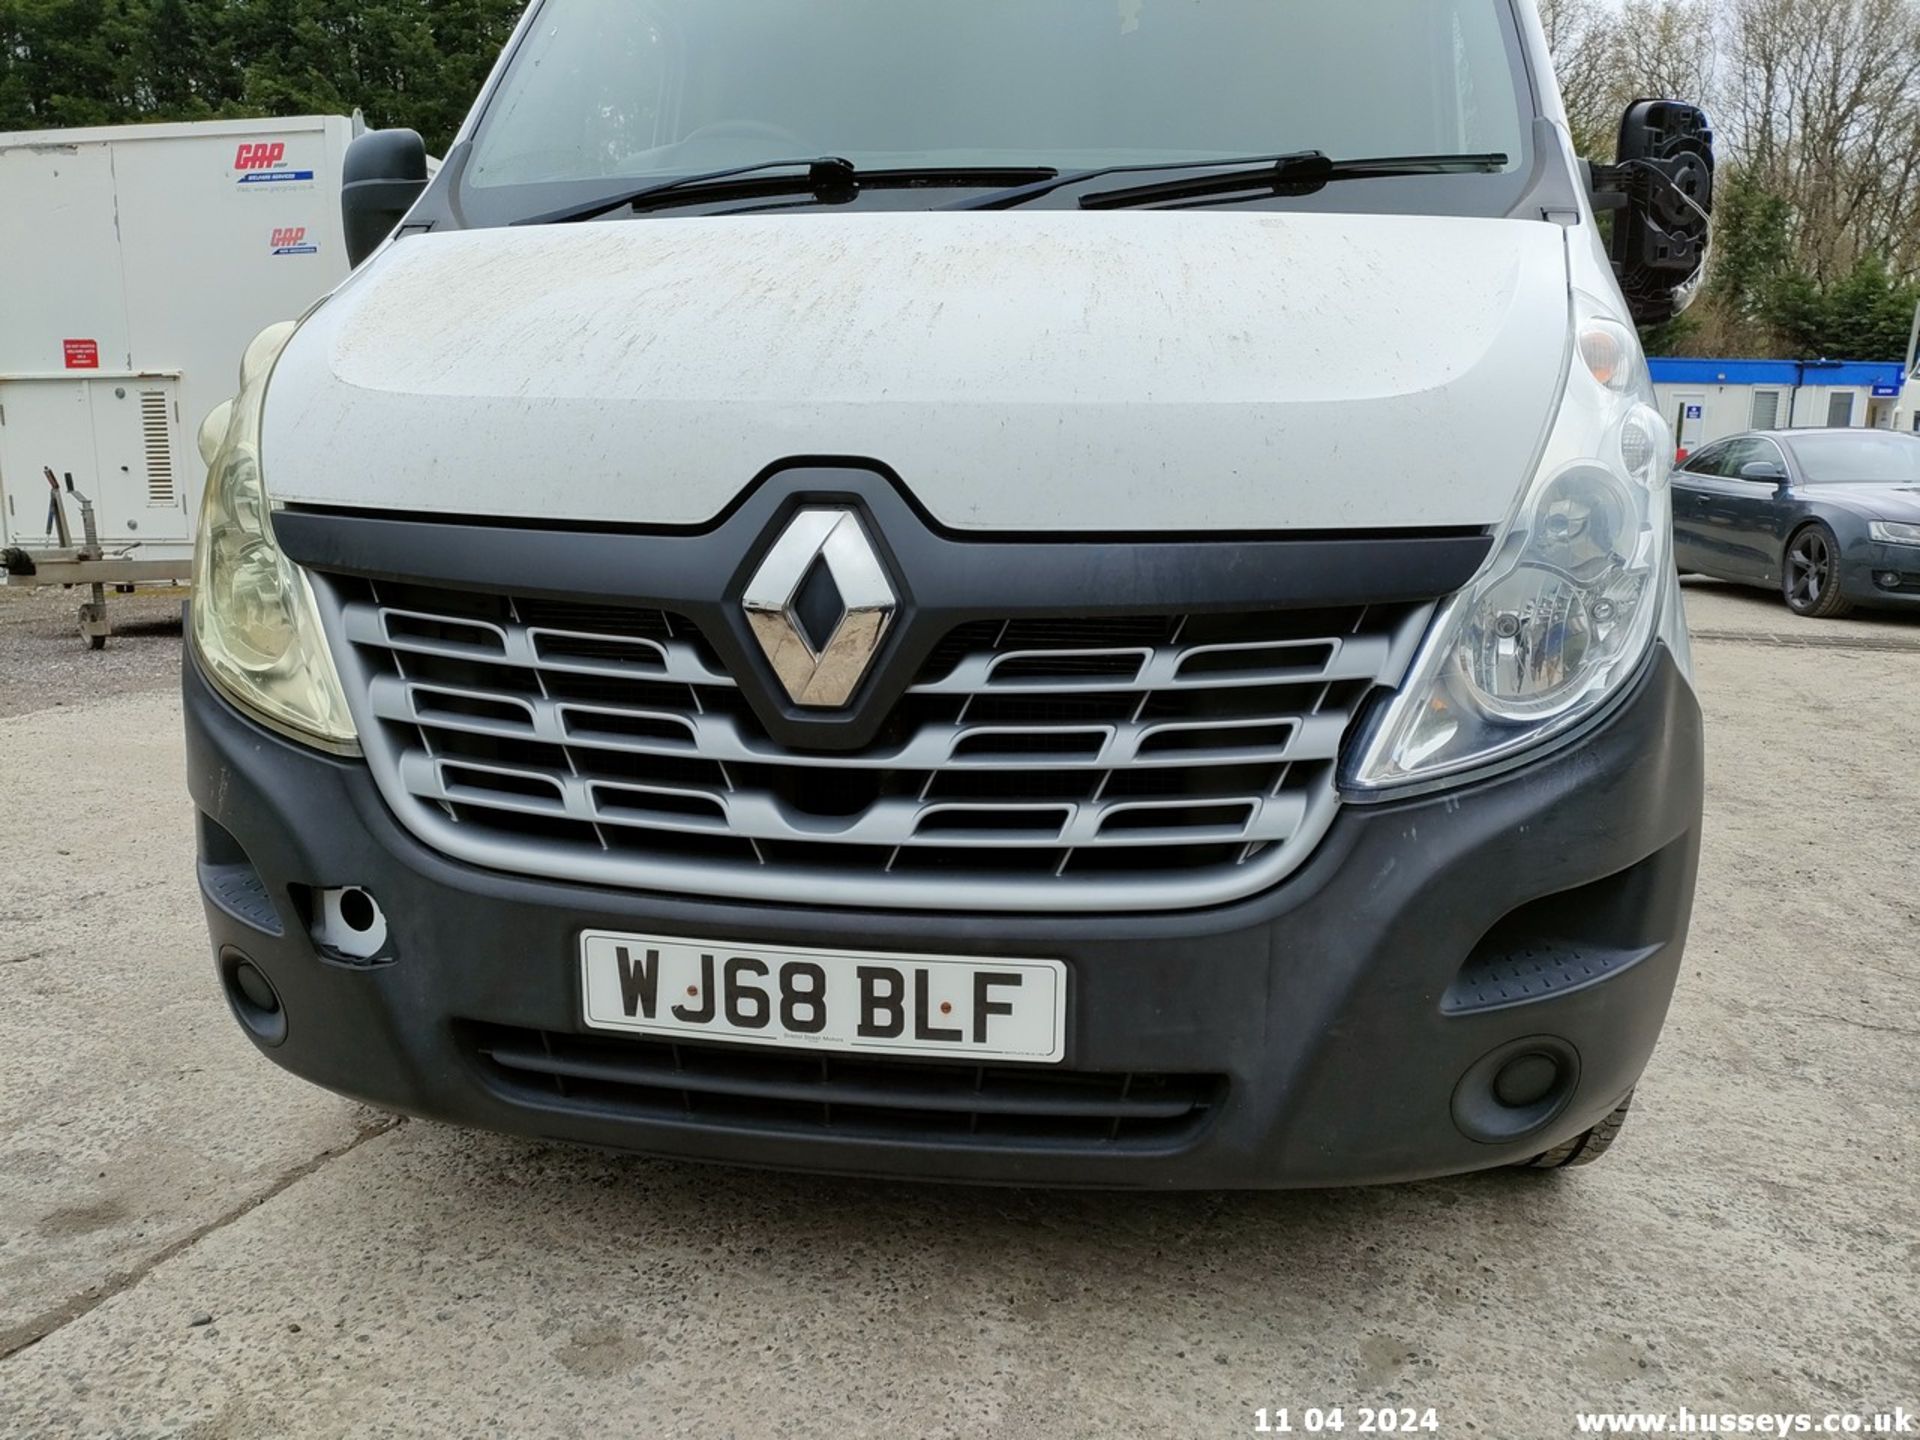 18/68 RENAULT MASTER LM35 BUSINESS DCI - 2298cc 5dr Van (White) - Image 12 of 68